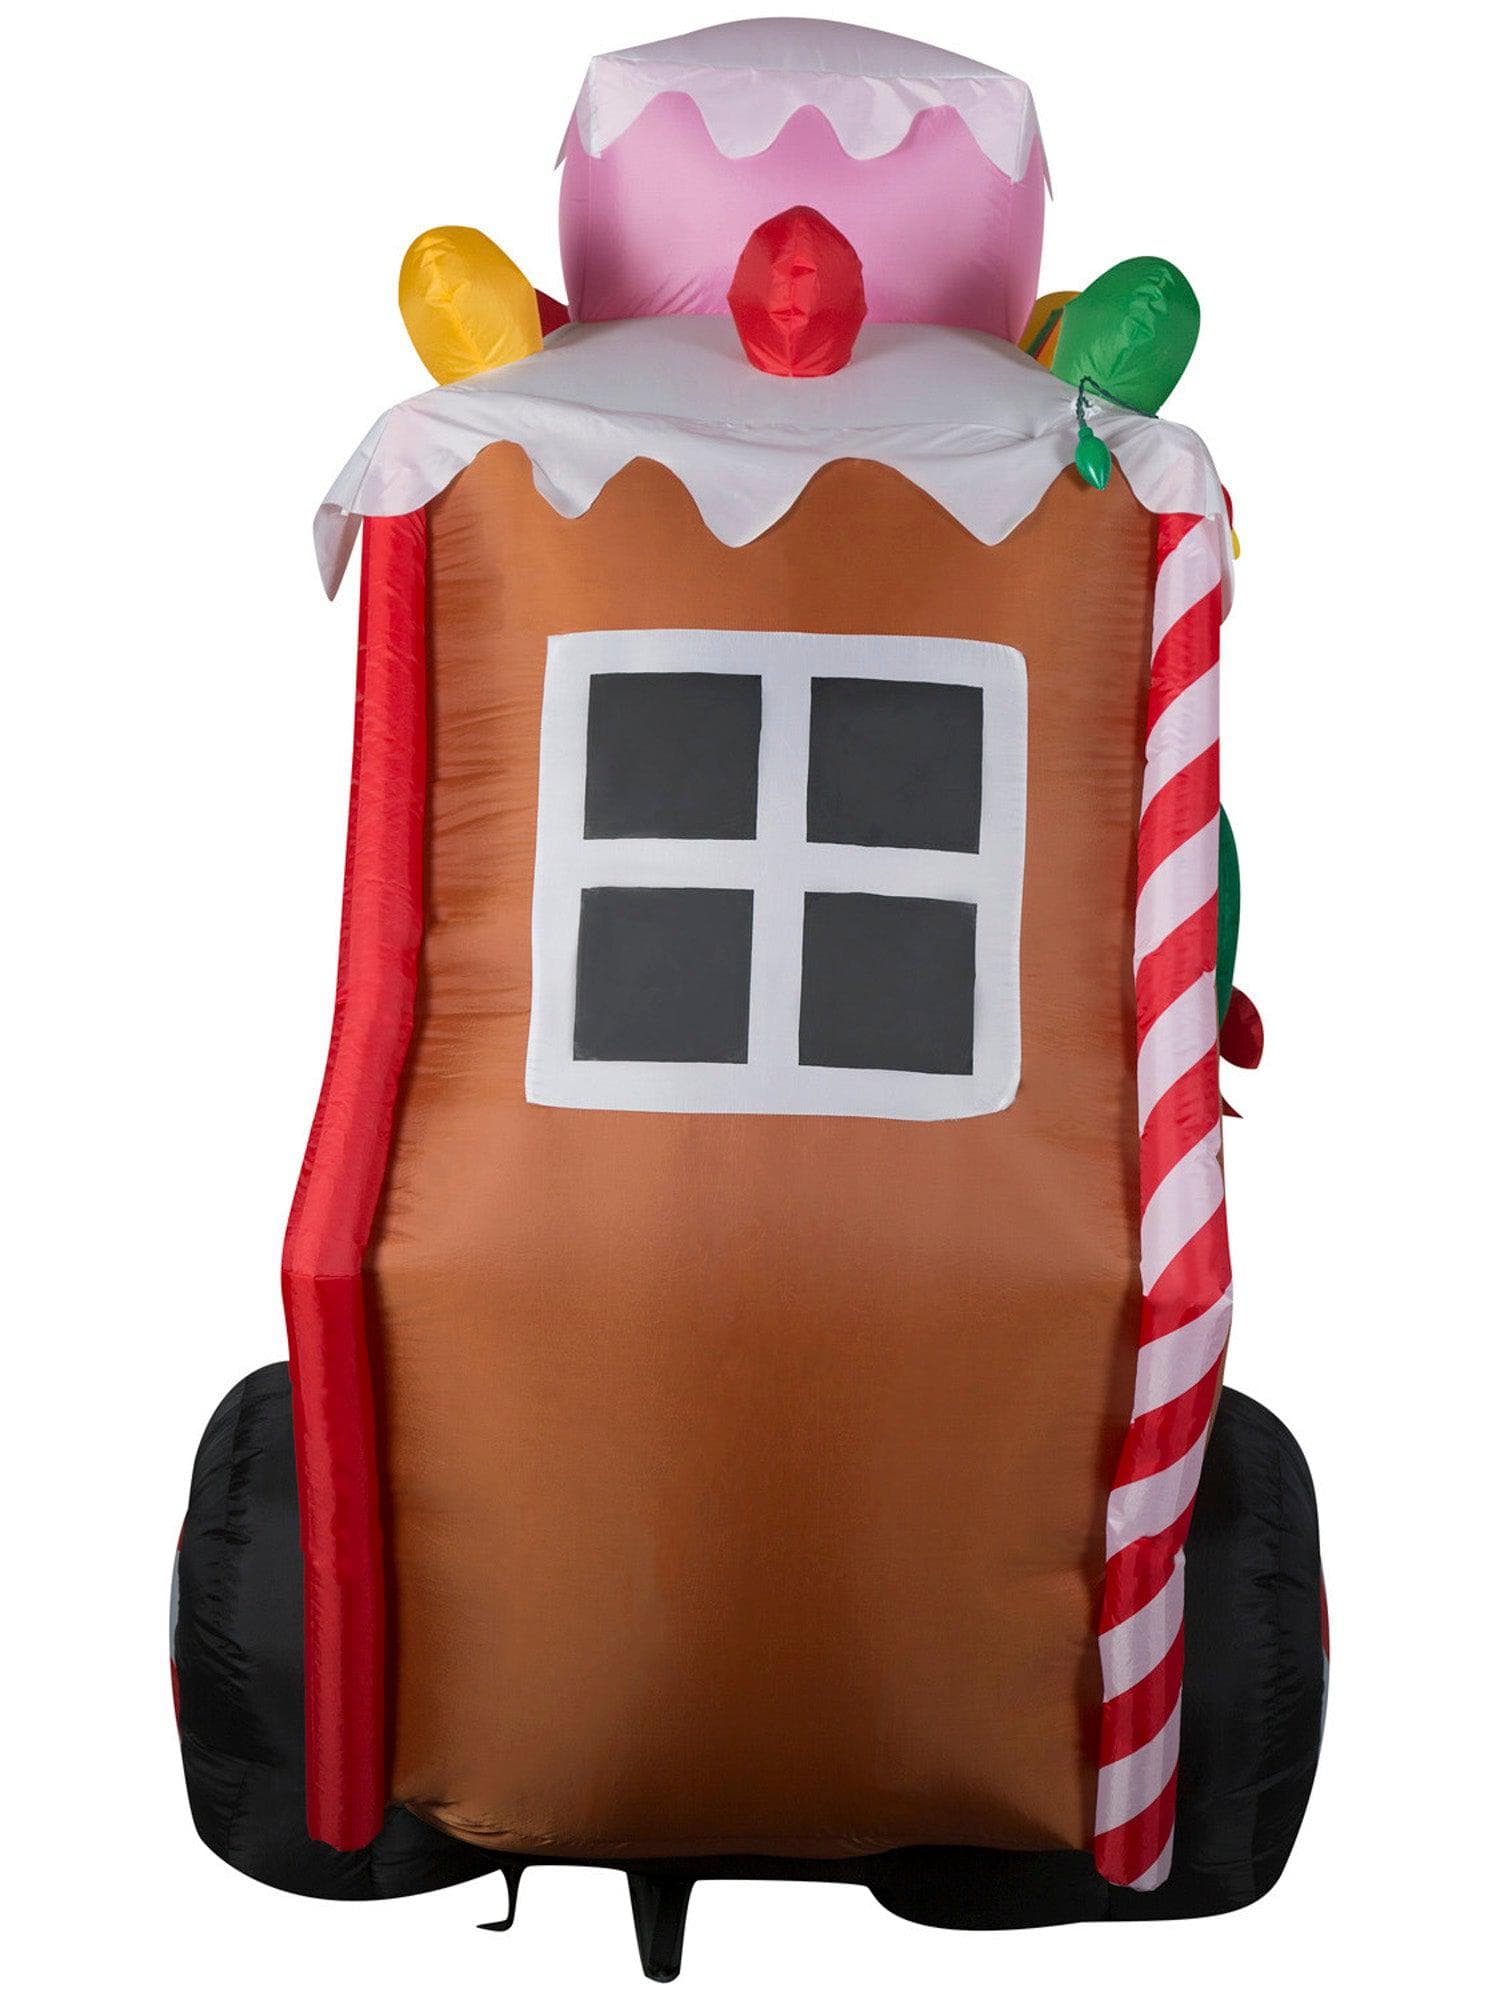 7.5 Foot Santa's Gingerbread Trailor Light Up Christmas Inflatable Lawn Decor - costumes.com